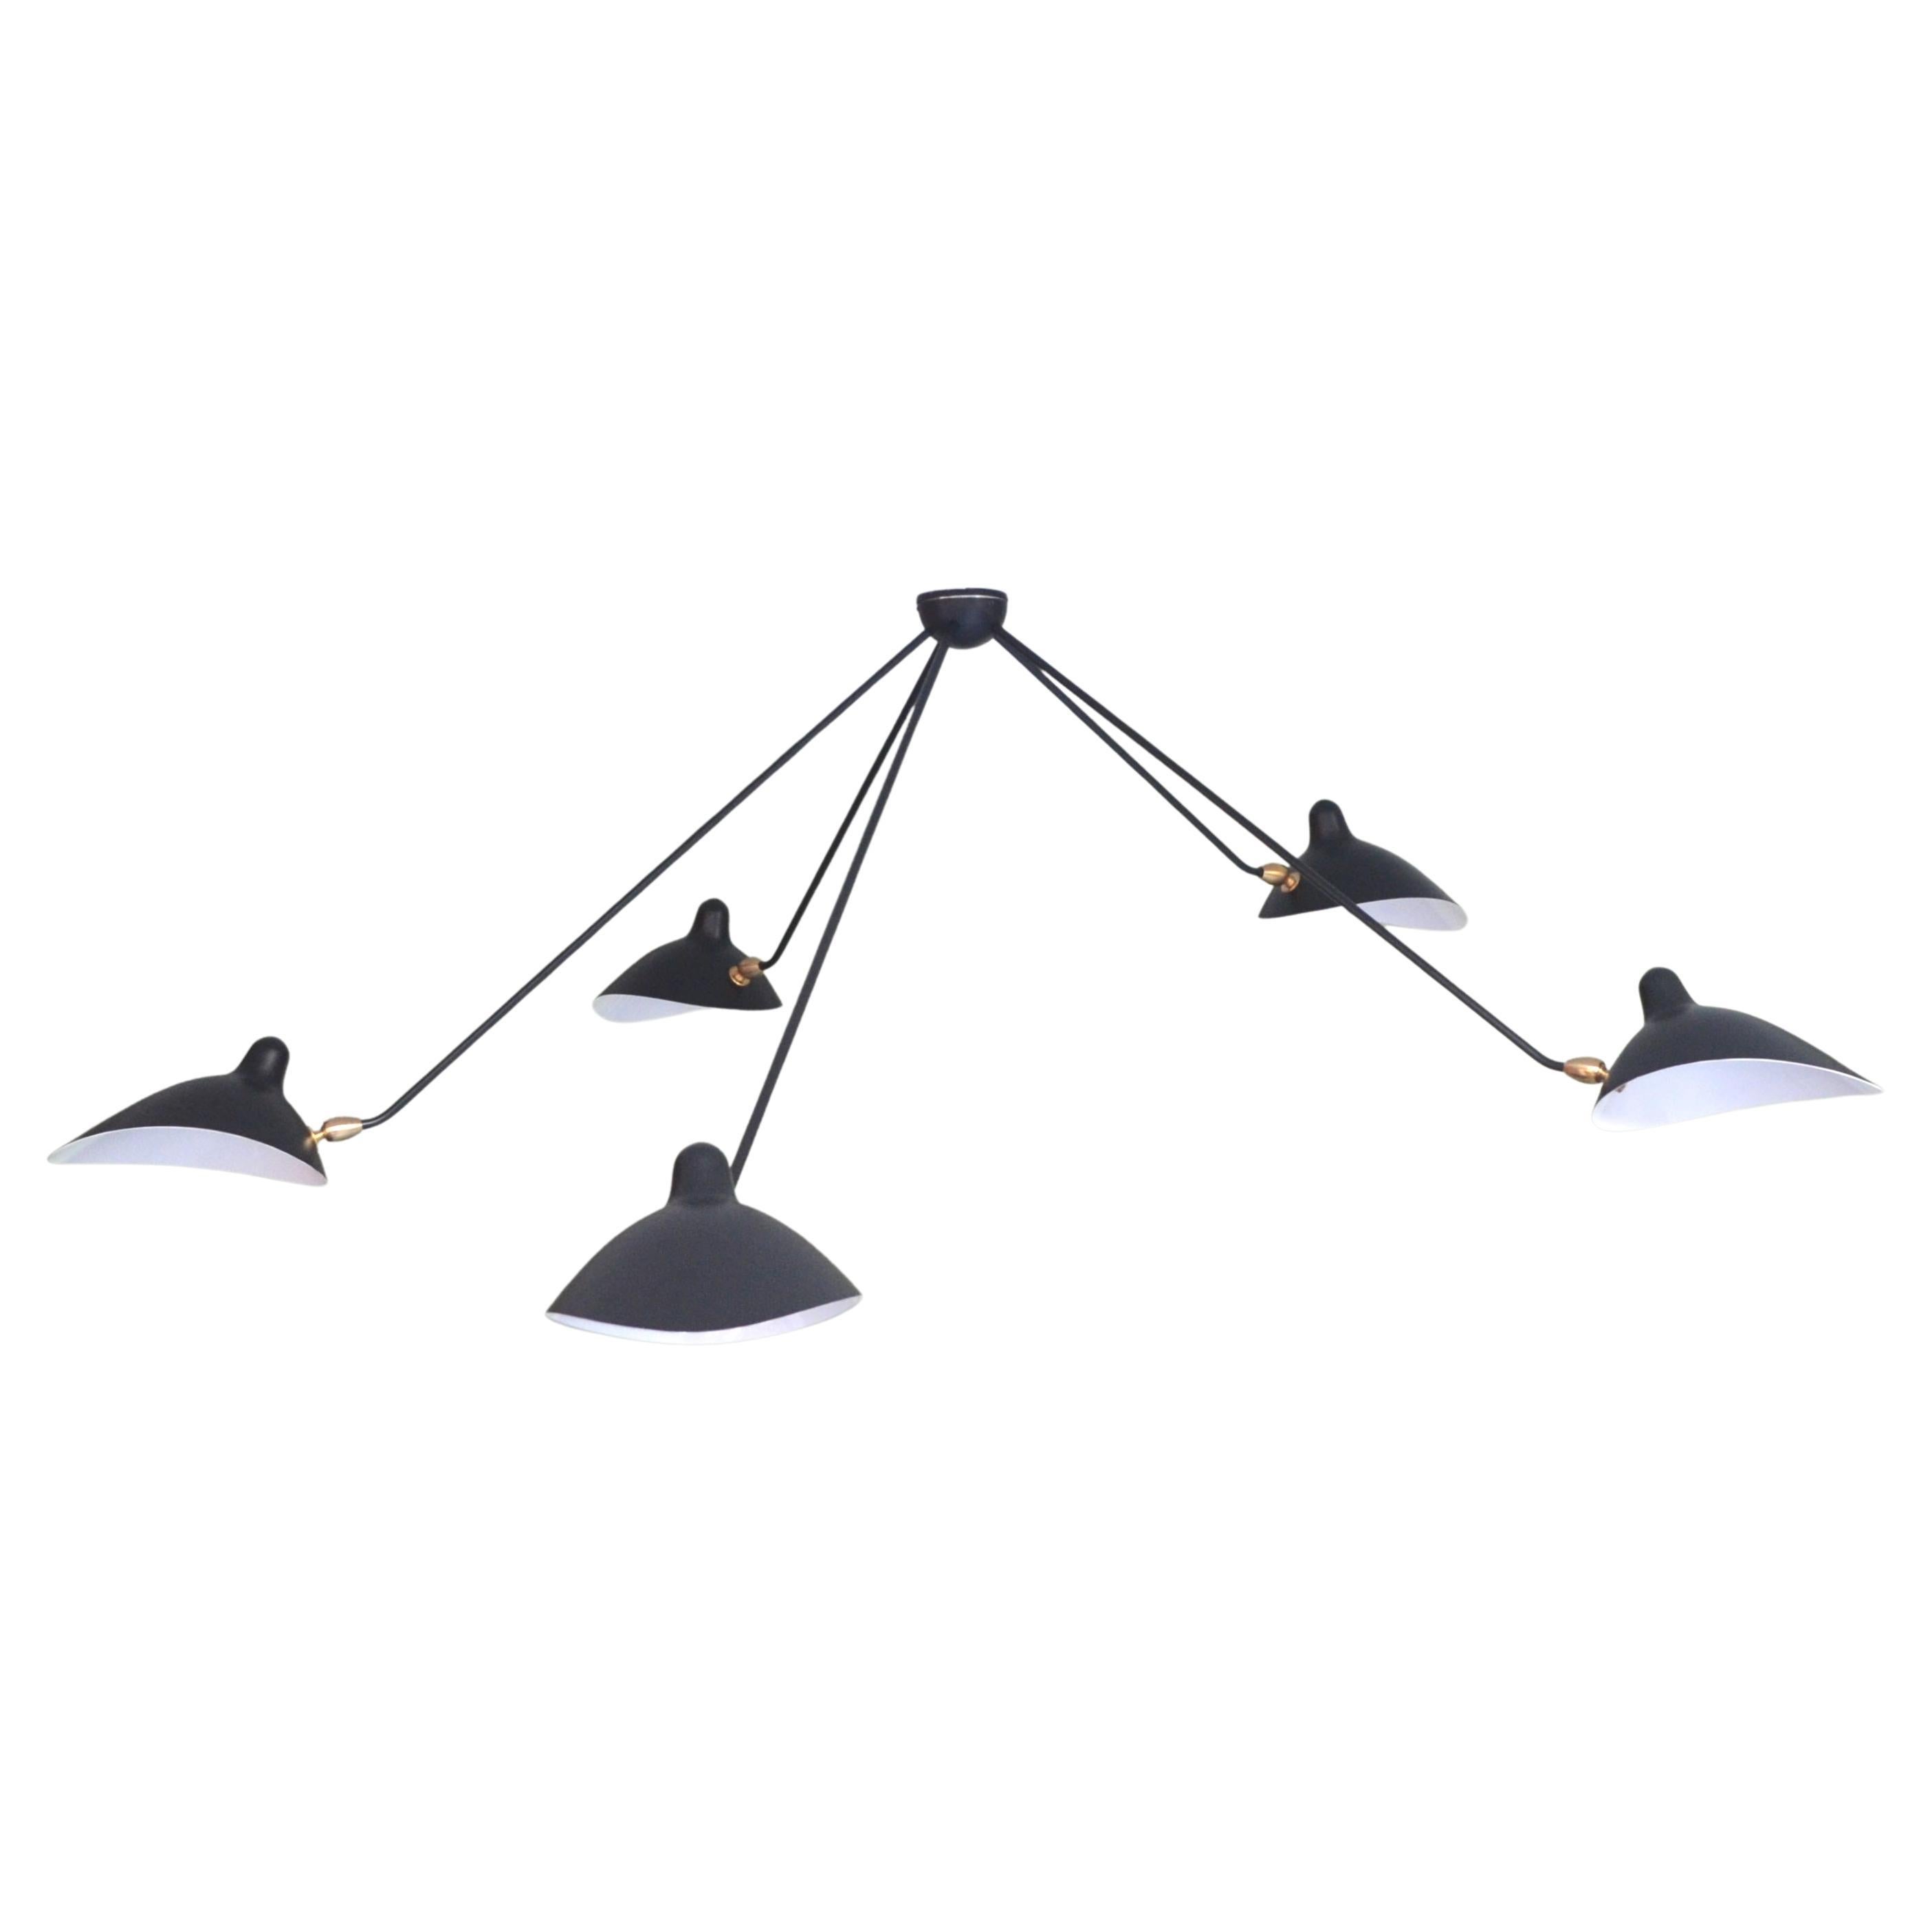 Serge Mouille - Spider Ceiling Lamp with 5 Arms in Black For Sale